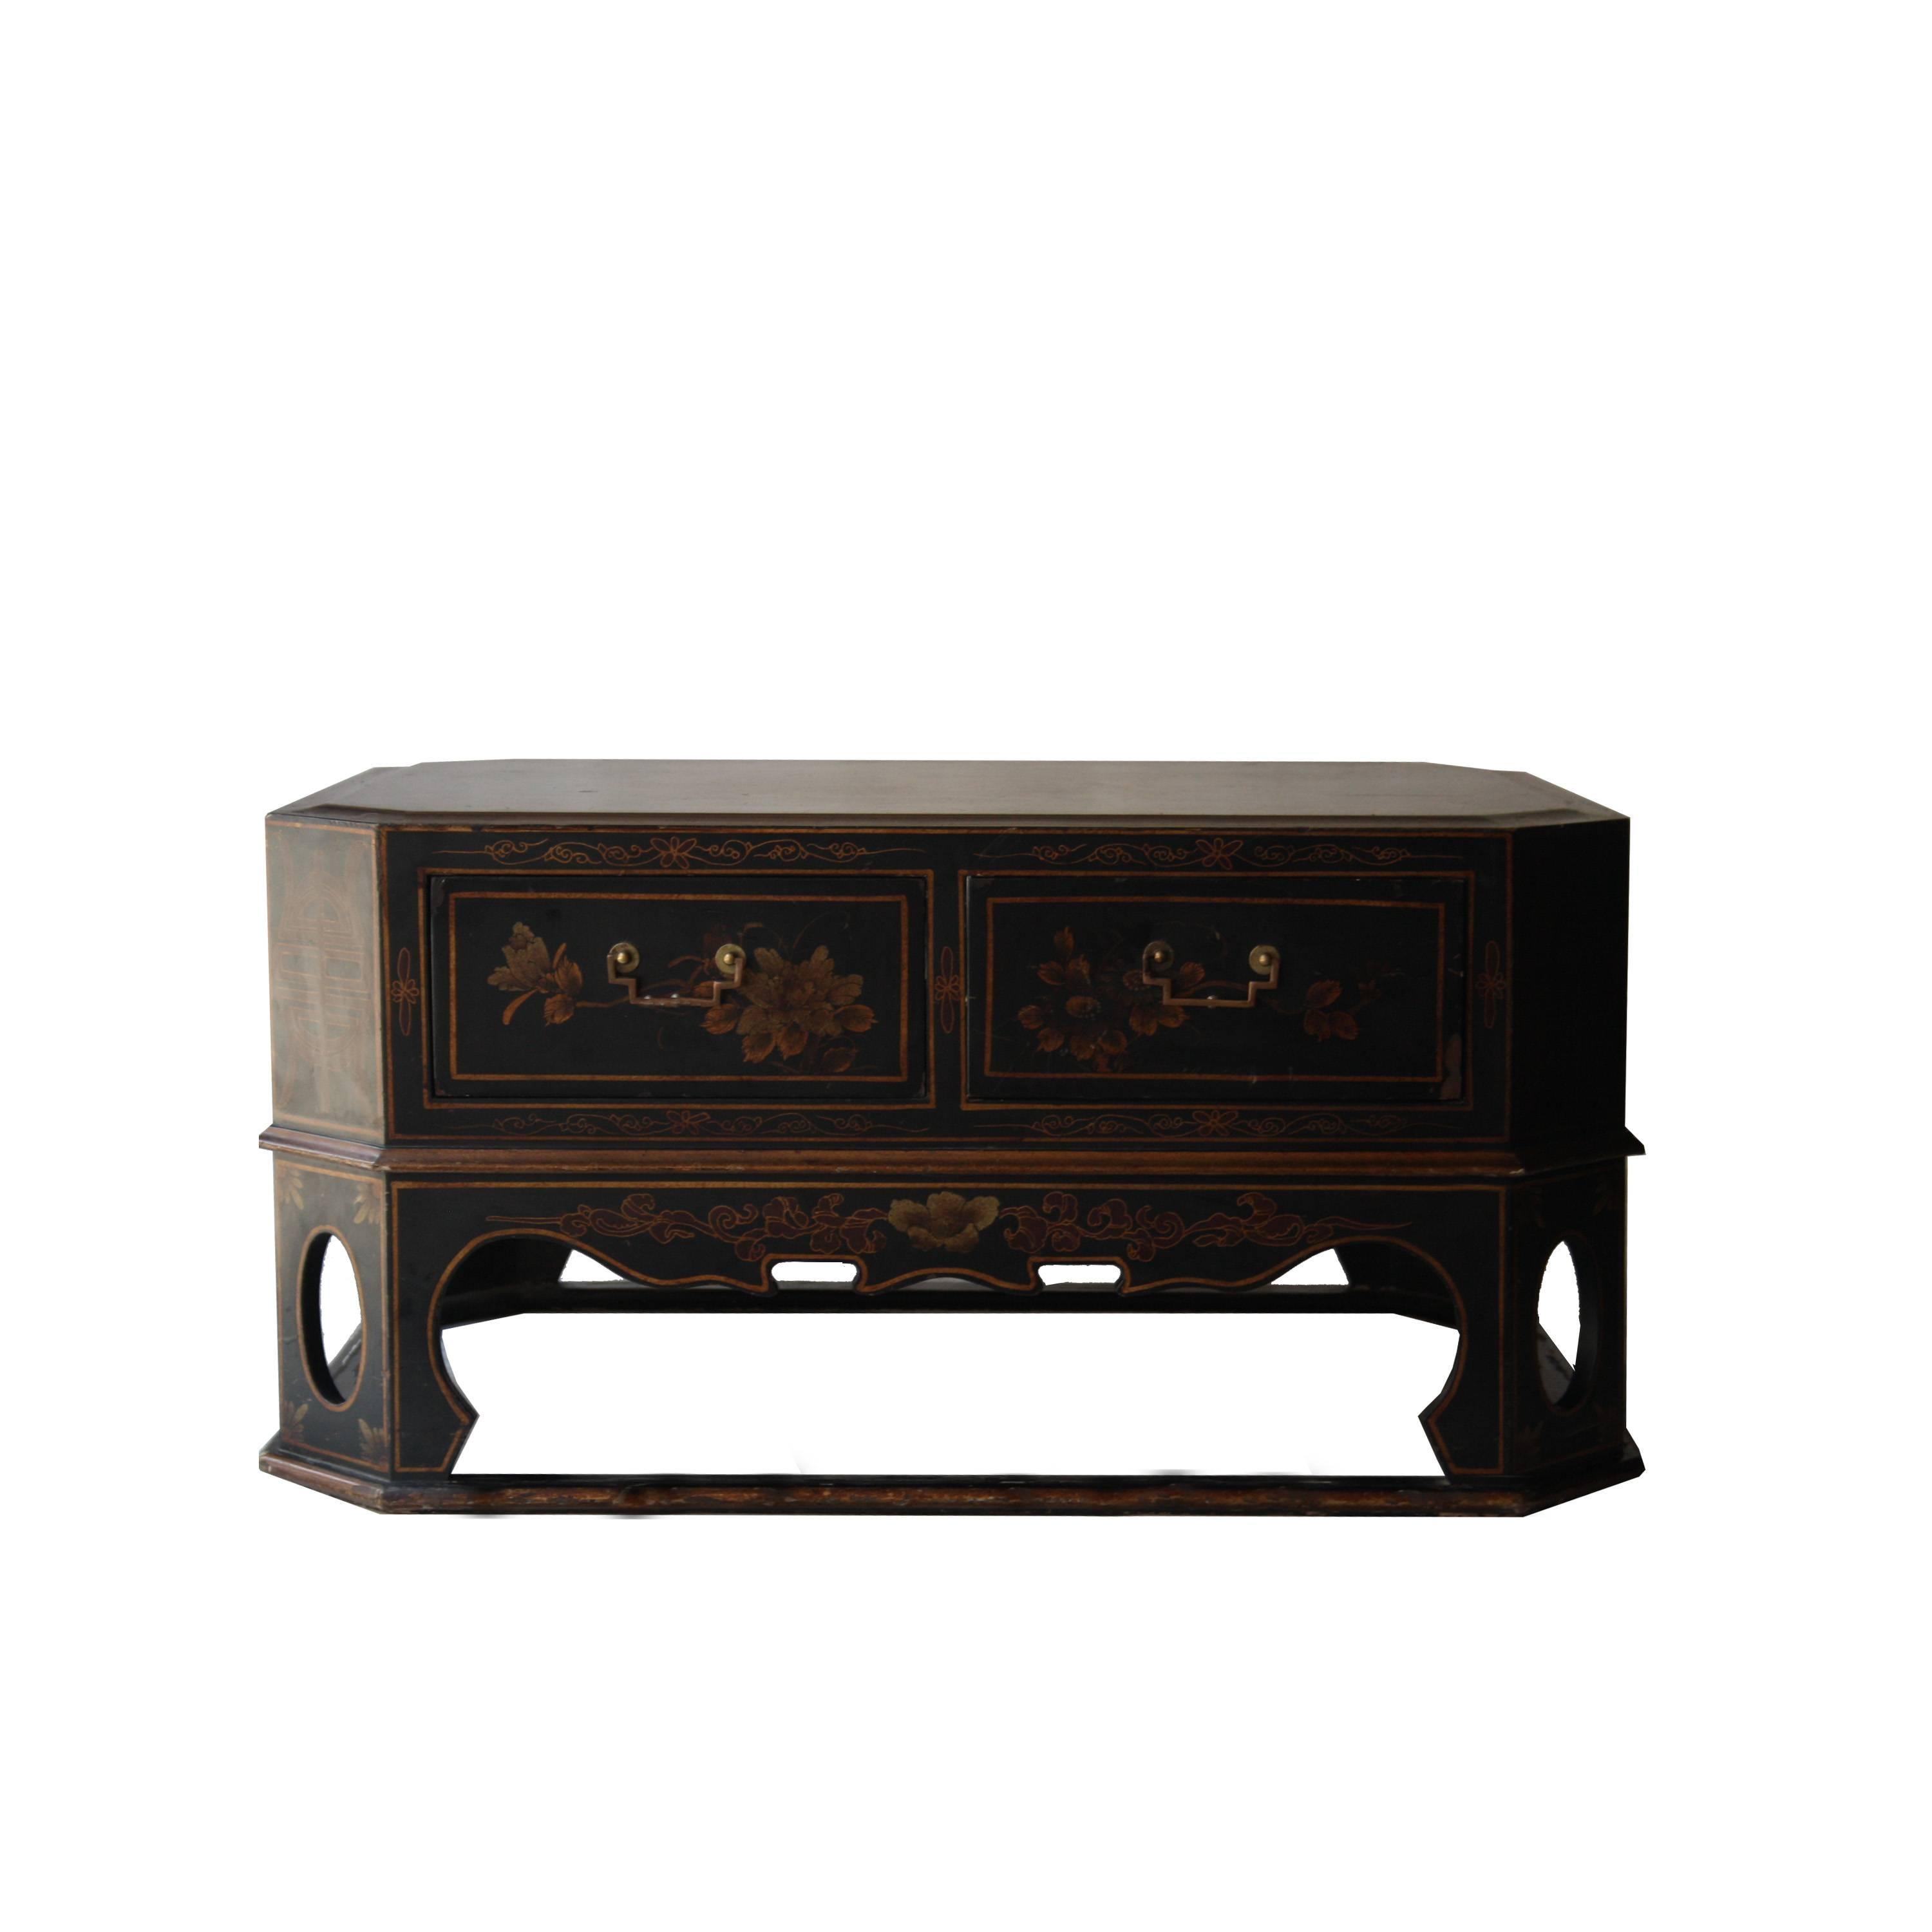 Octagonal centre table made of handcrafted wood. Black and golden lacquered finishing with oriental motifs.
 